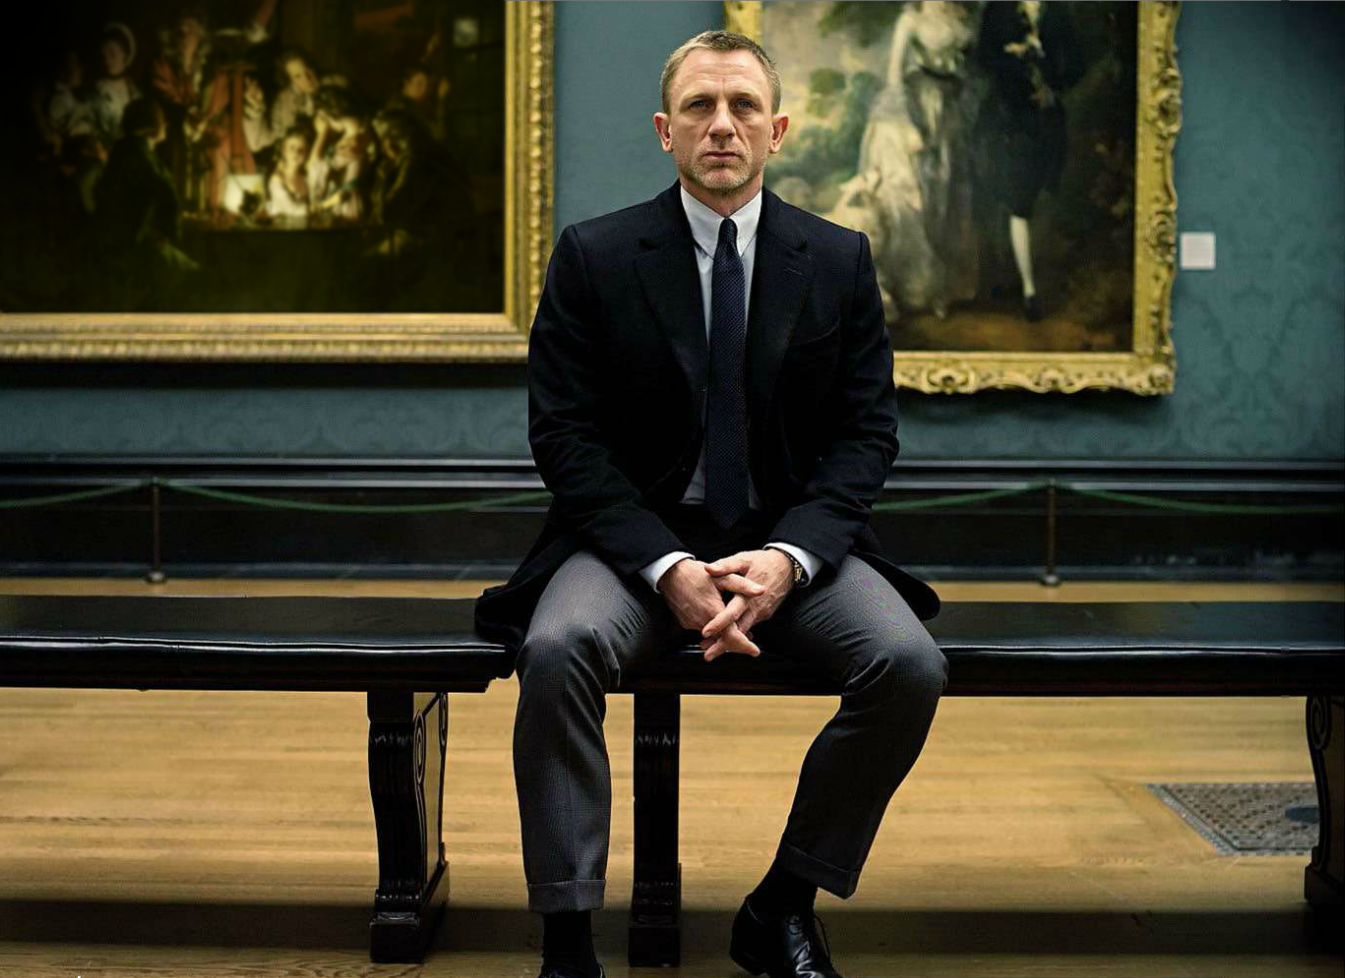 Sam Mendes' mortality-obsessed Skyfall seemed to undo the rebooting 007 got in Casino Royale. Sort of.